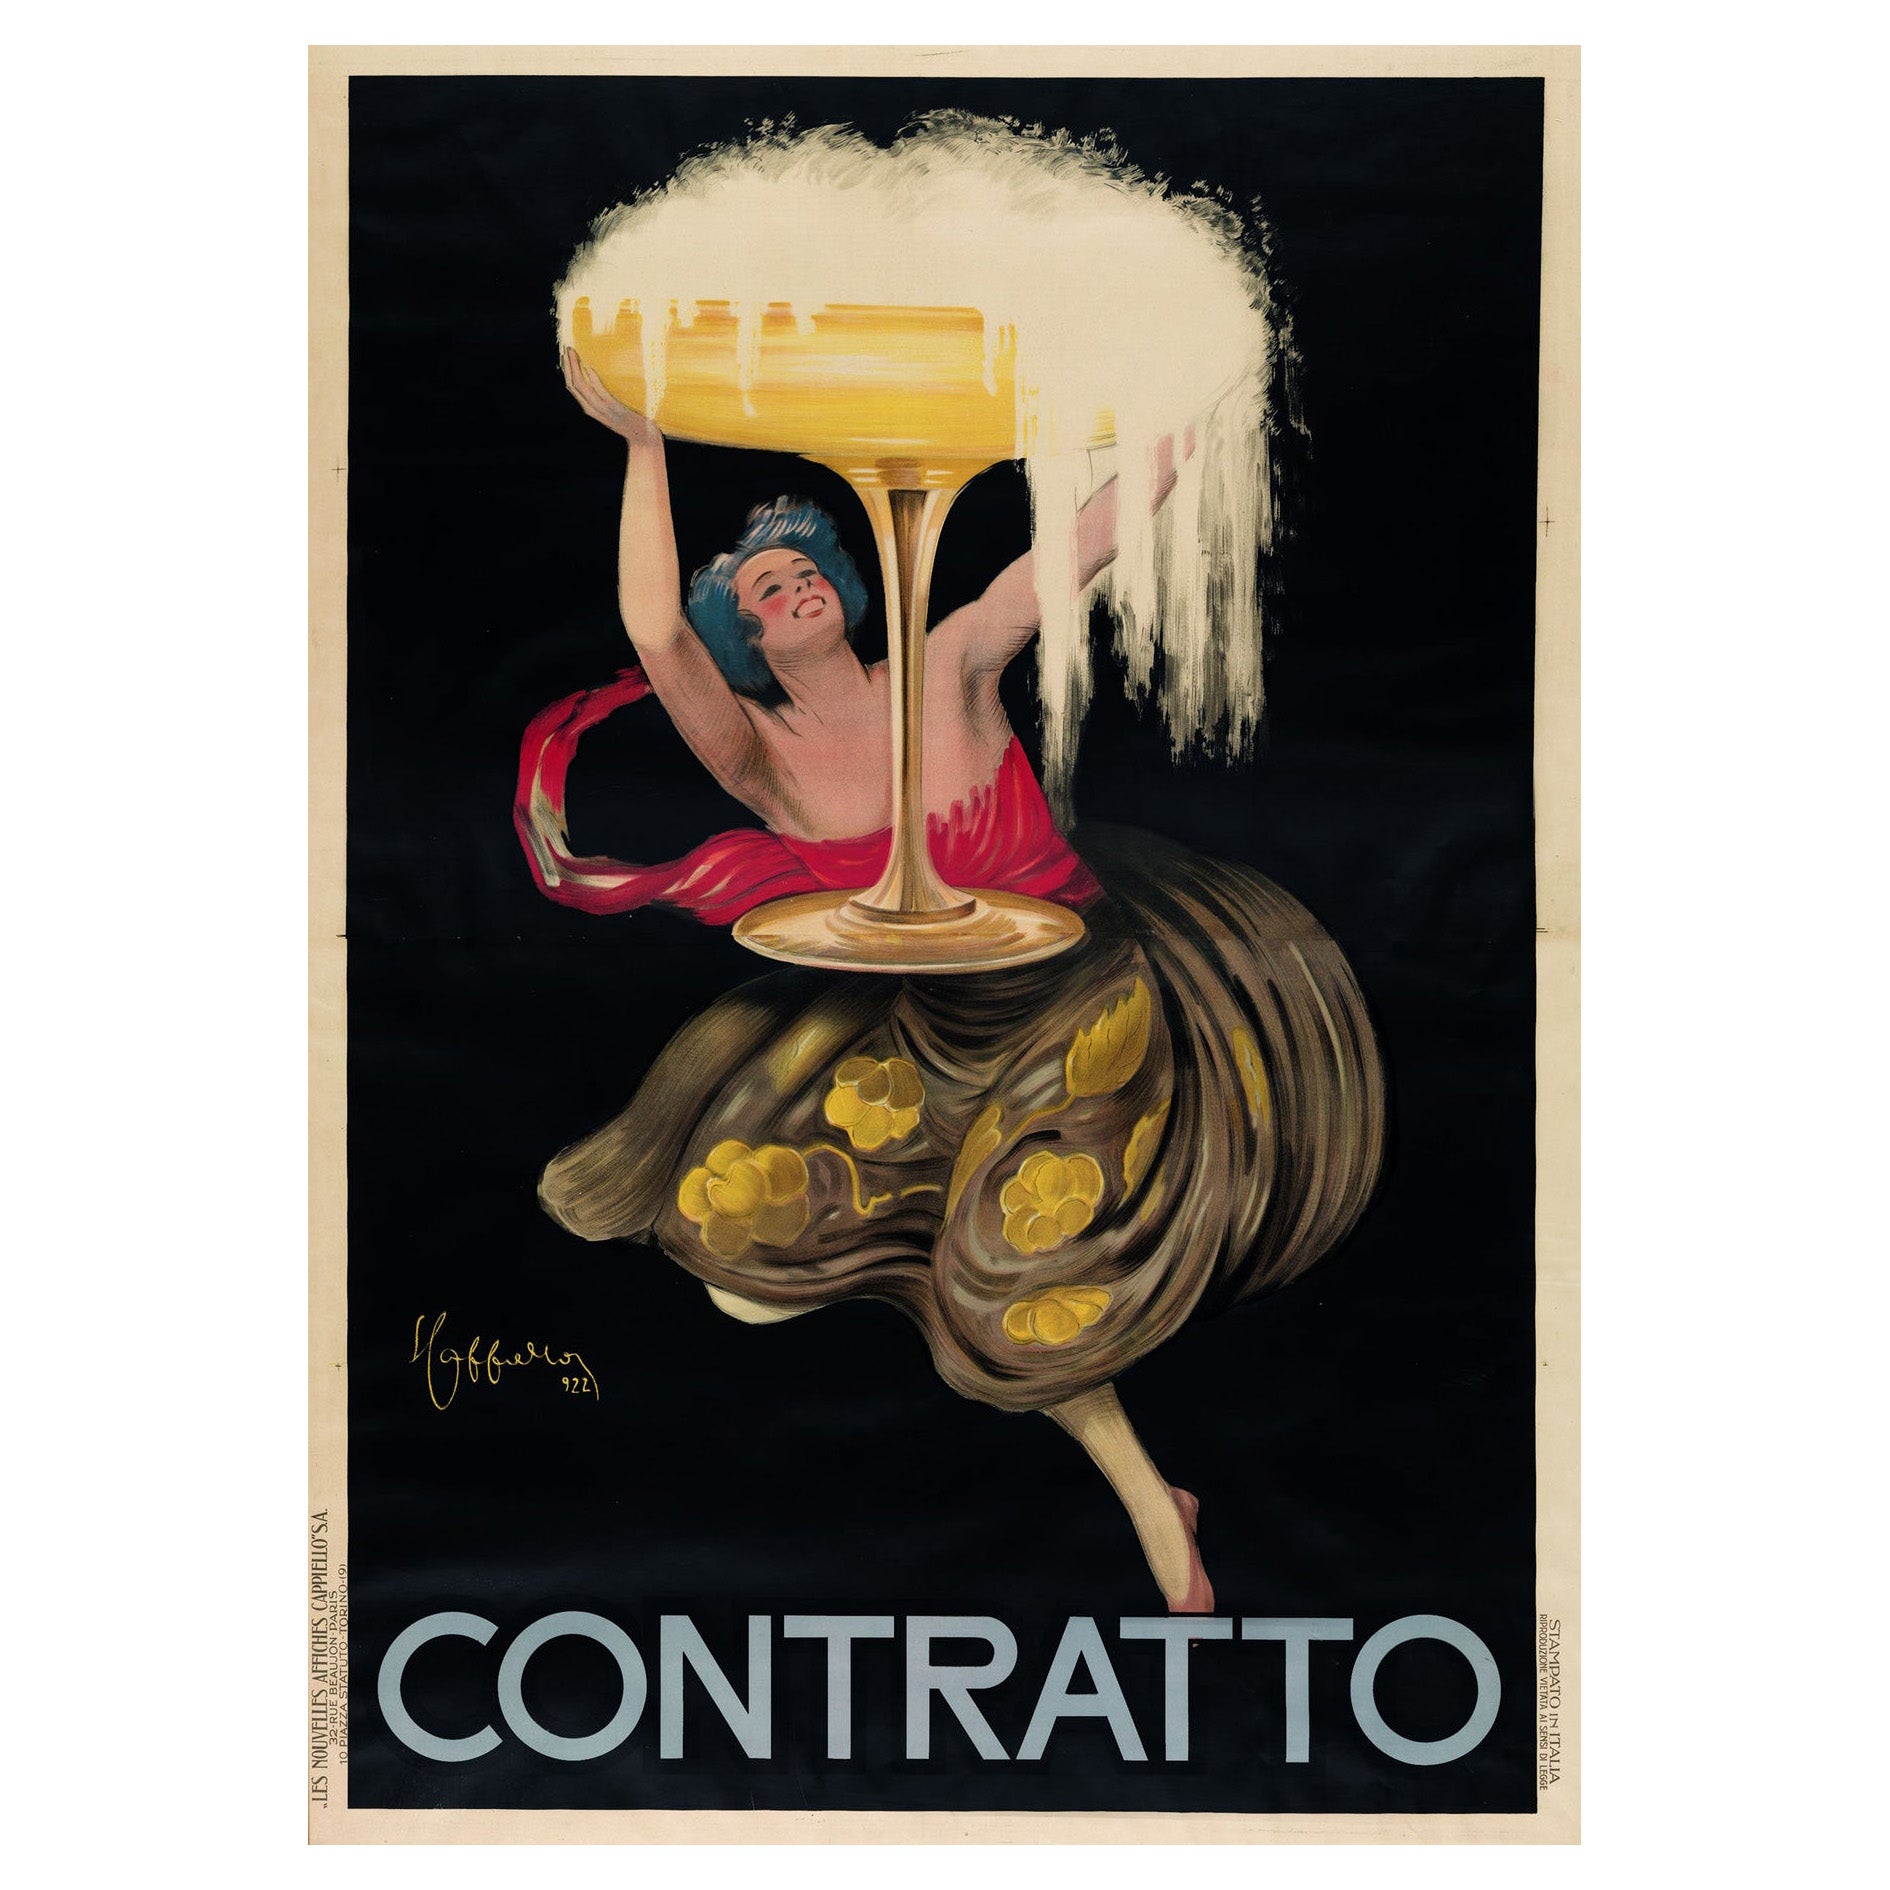 Contratto, 1922 Vintage French Alcohol Advertising Poster, Cappiello